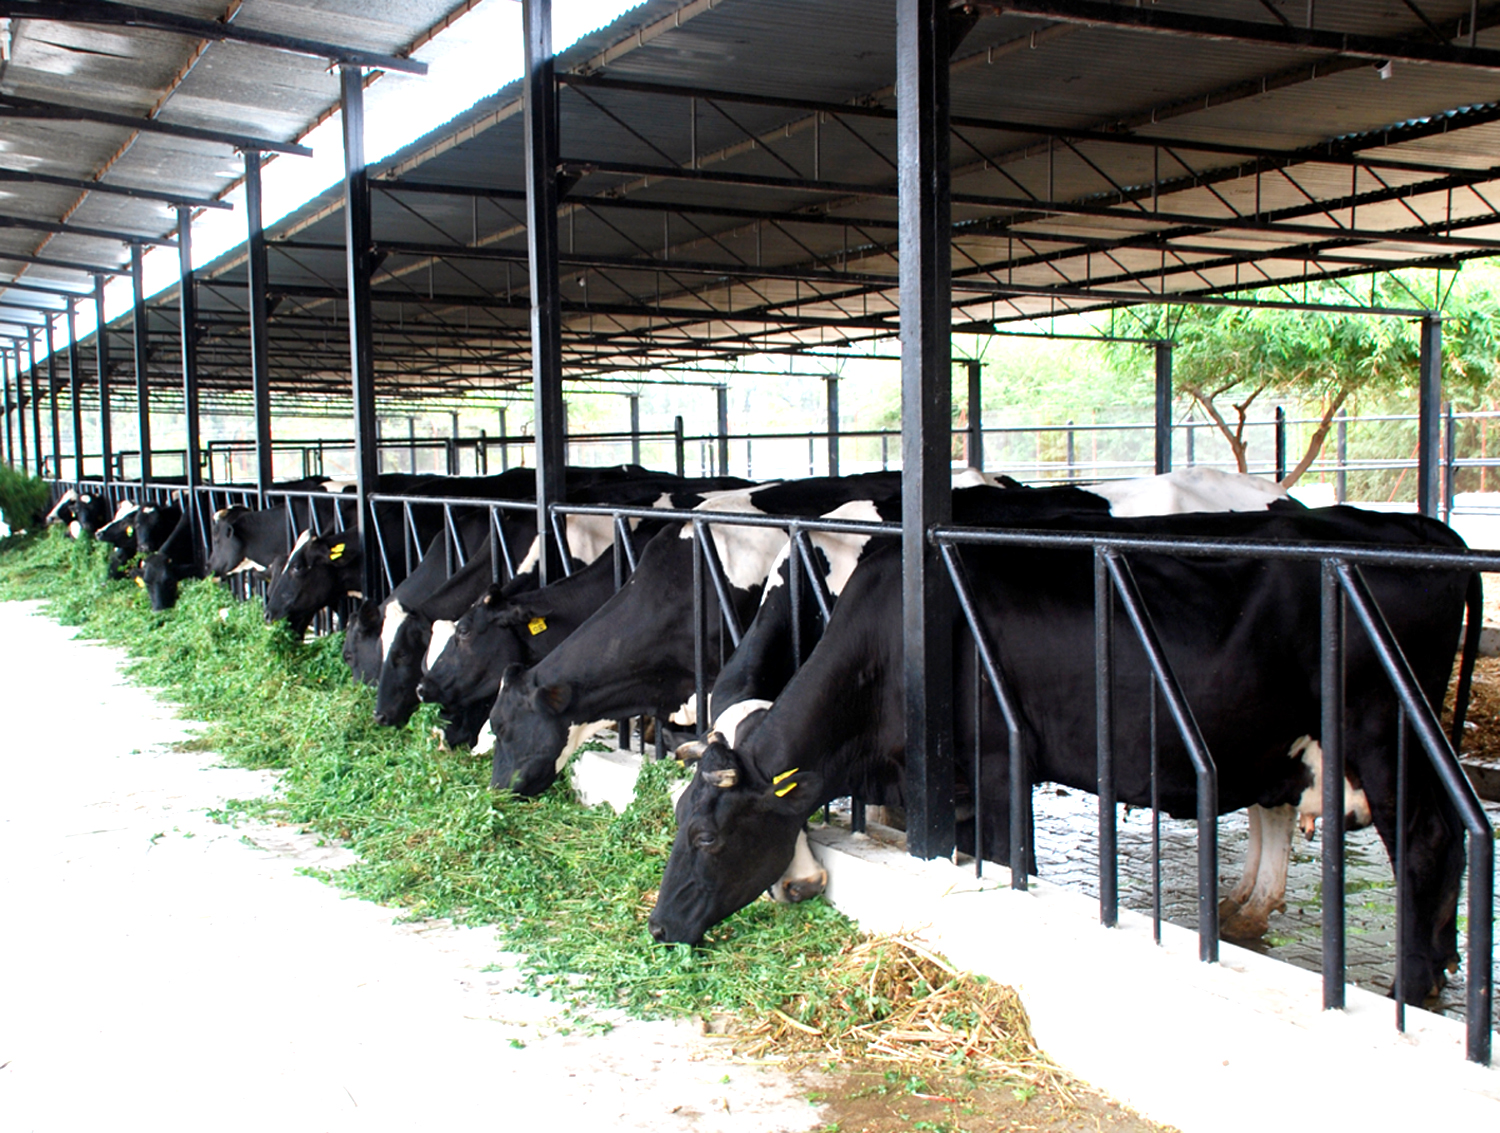 ... India, commercial dairy farming in India, dairy farming business plan